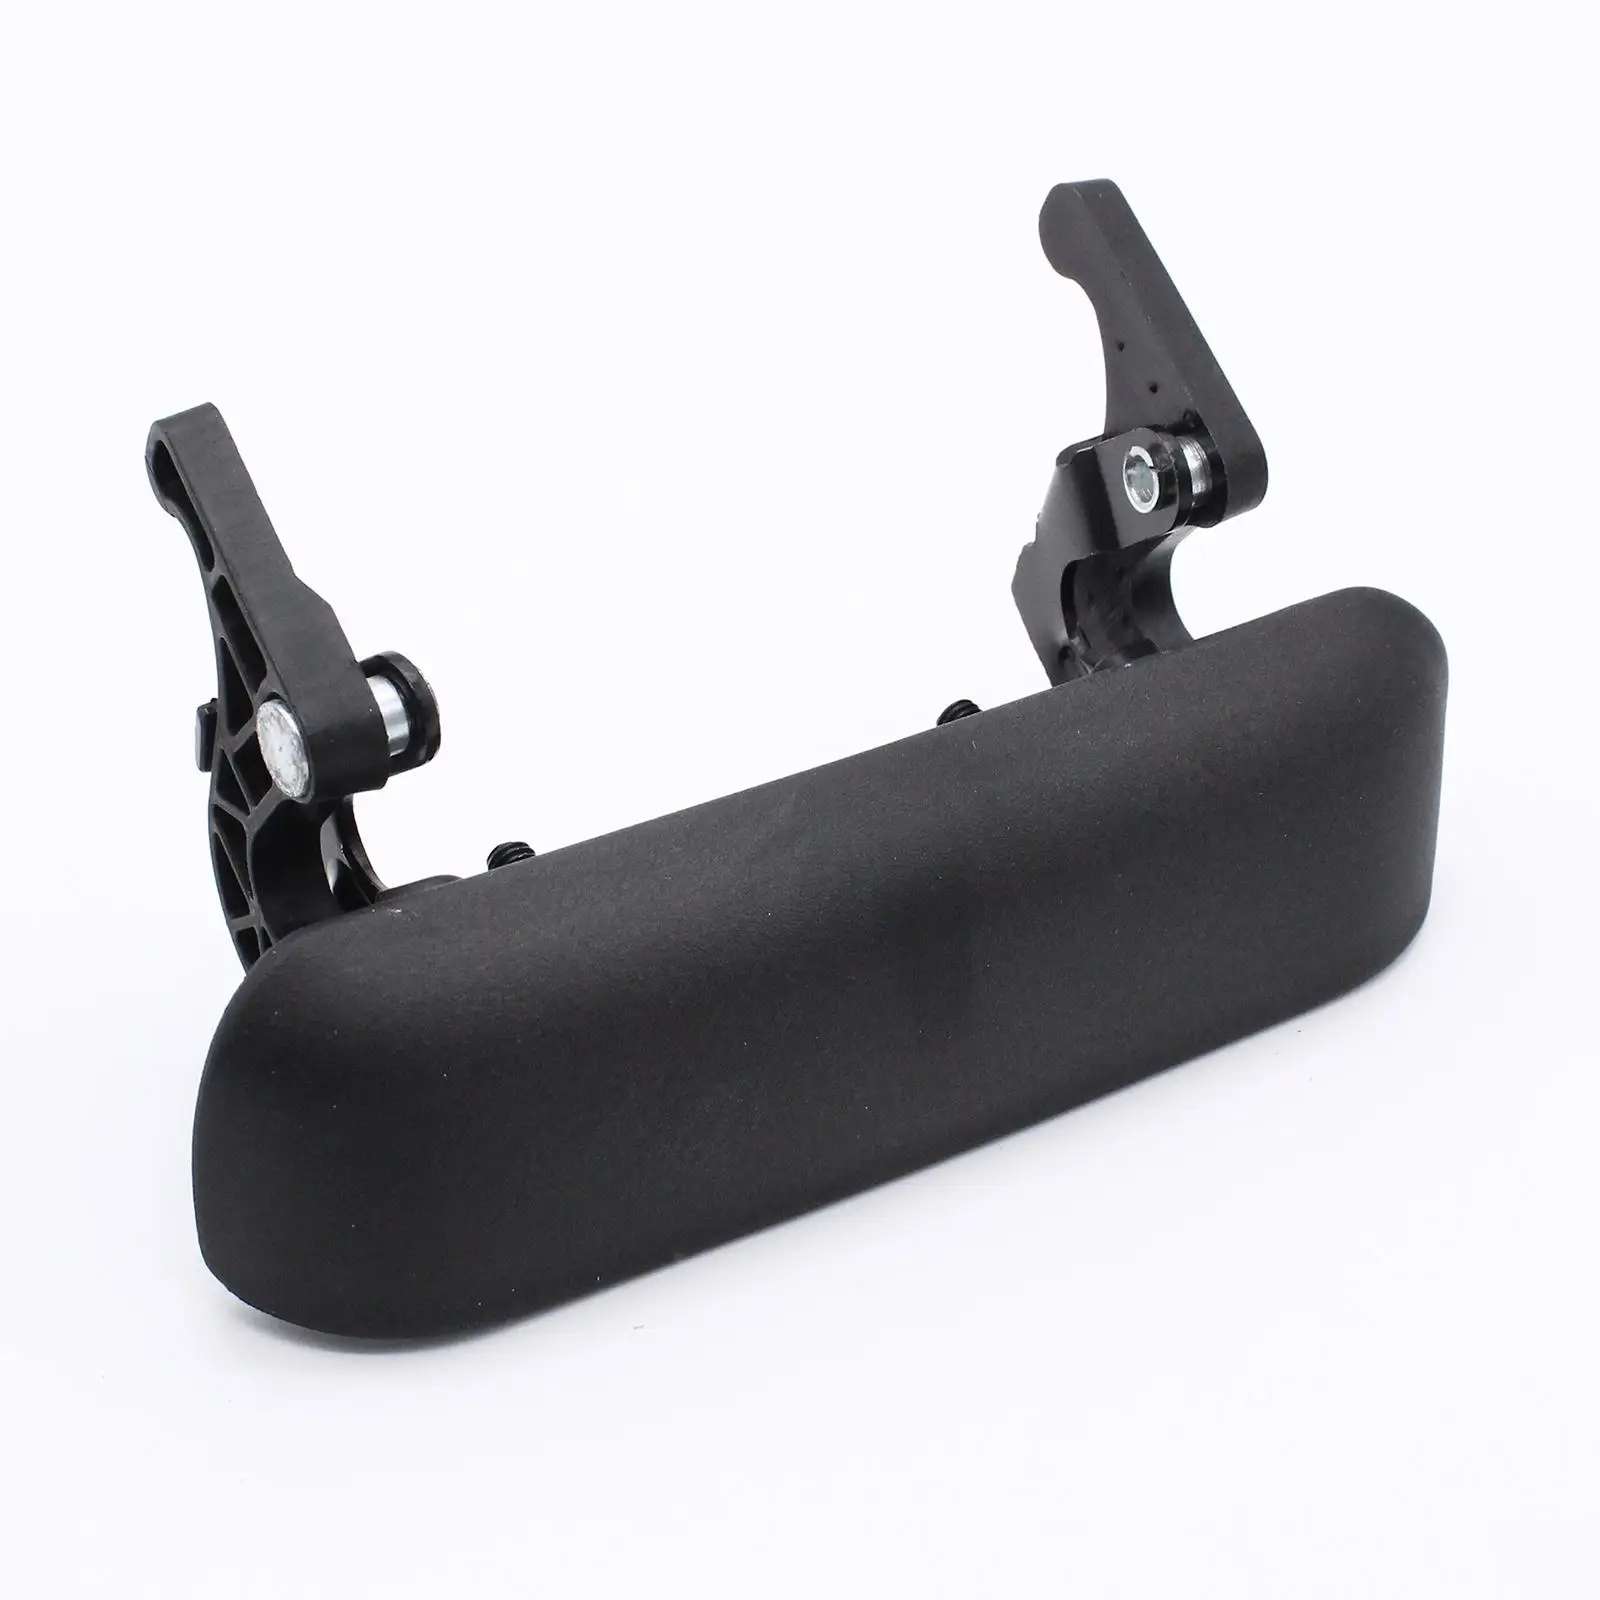 Fo1915109 Tailgate Handle Fit for Spare Parts Easy to Install Durable